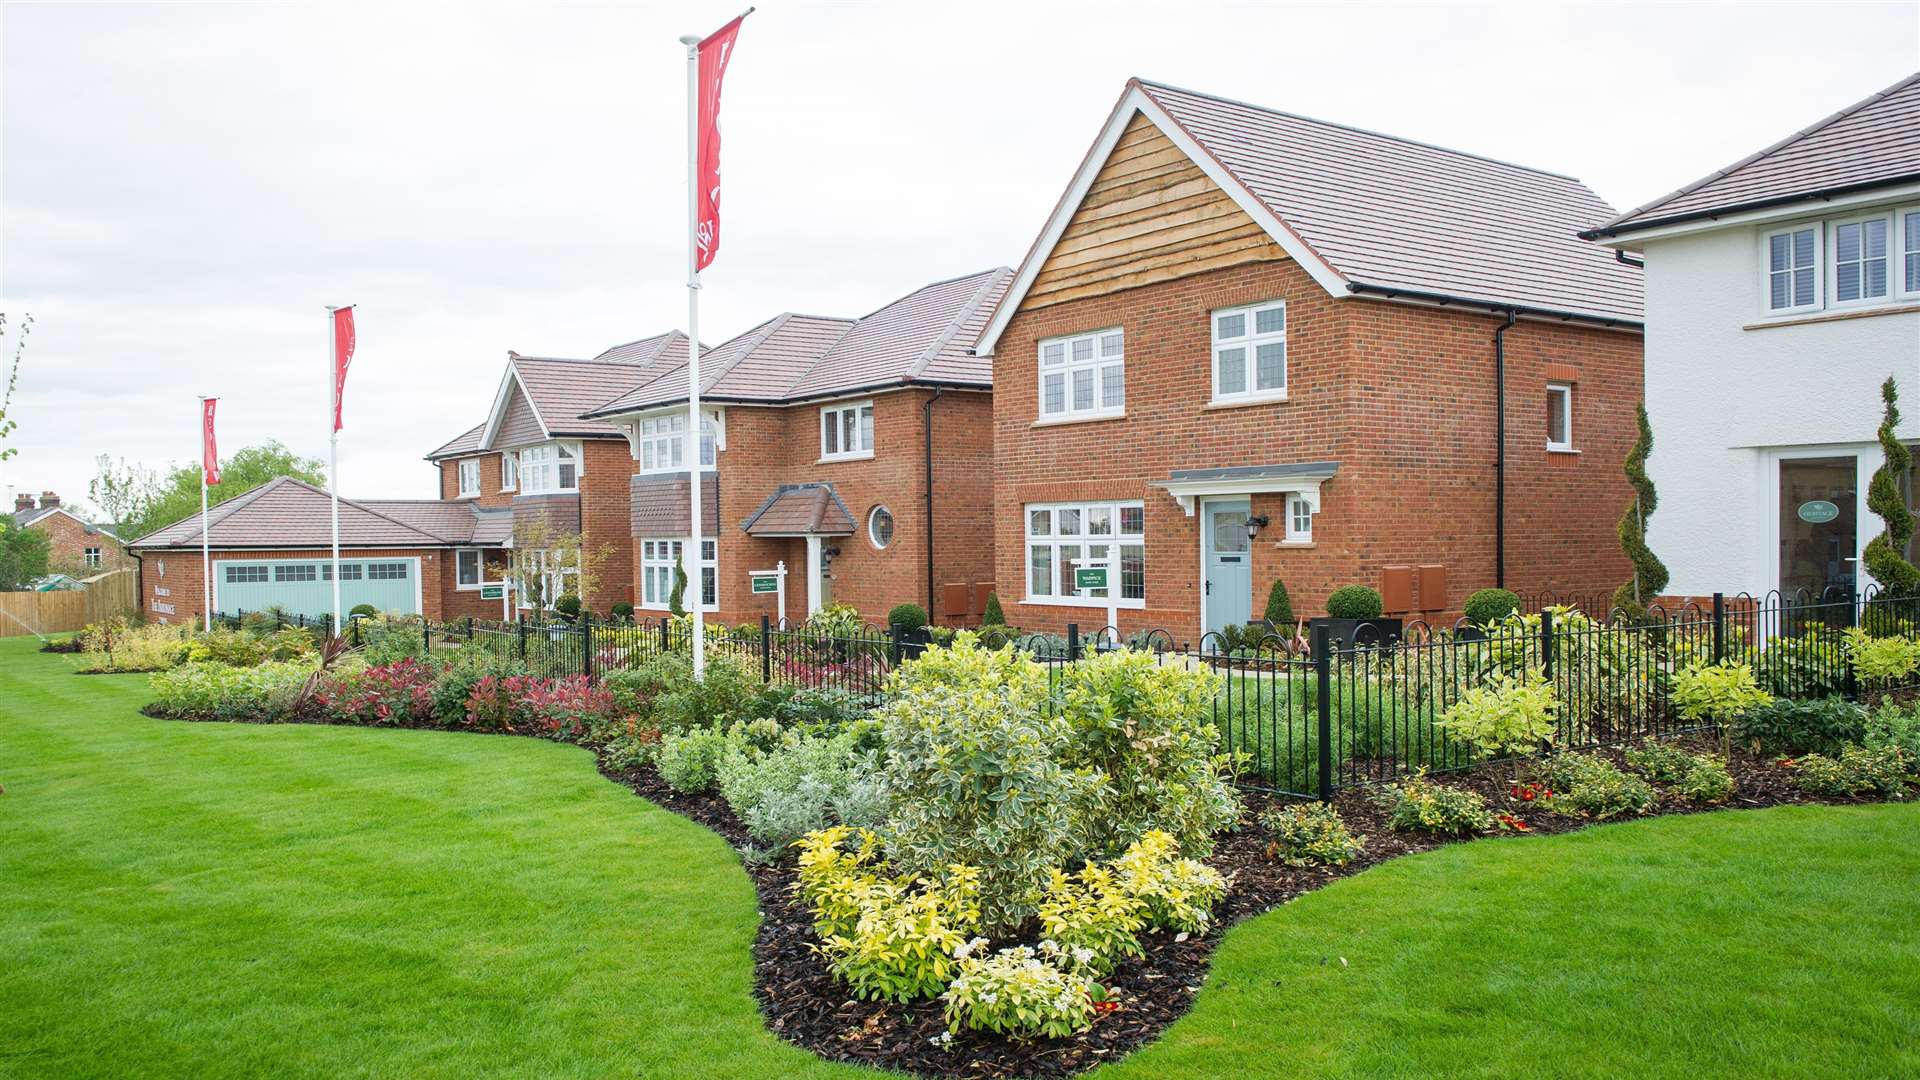 A Redrow development, the Parsonage, at Marden